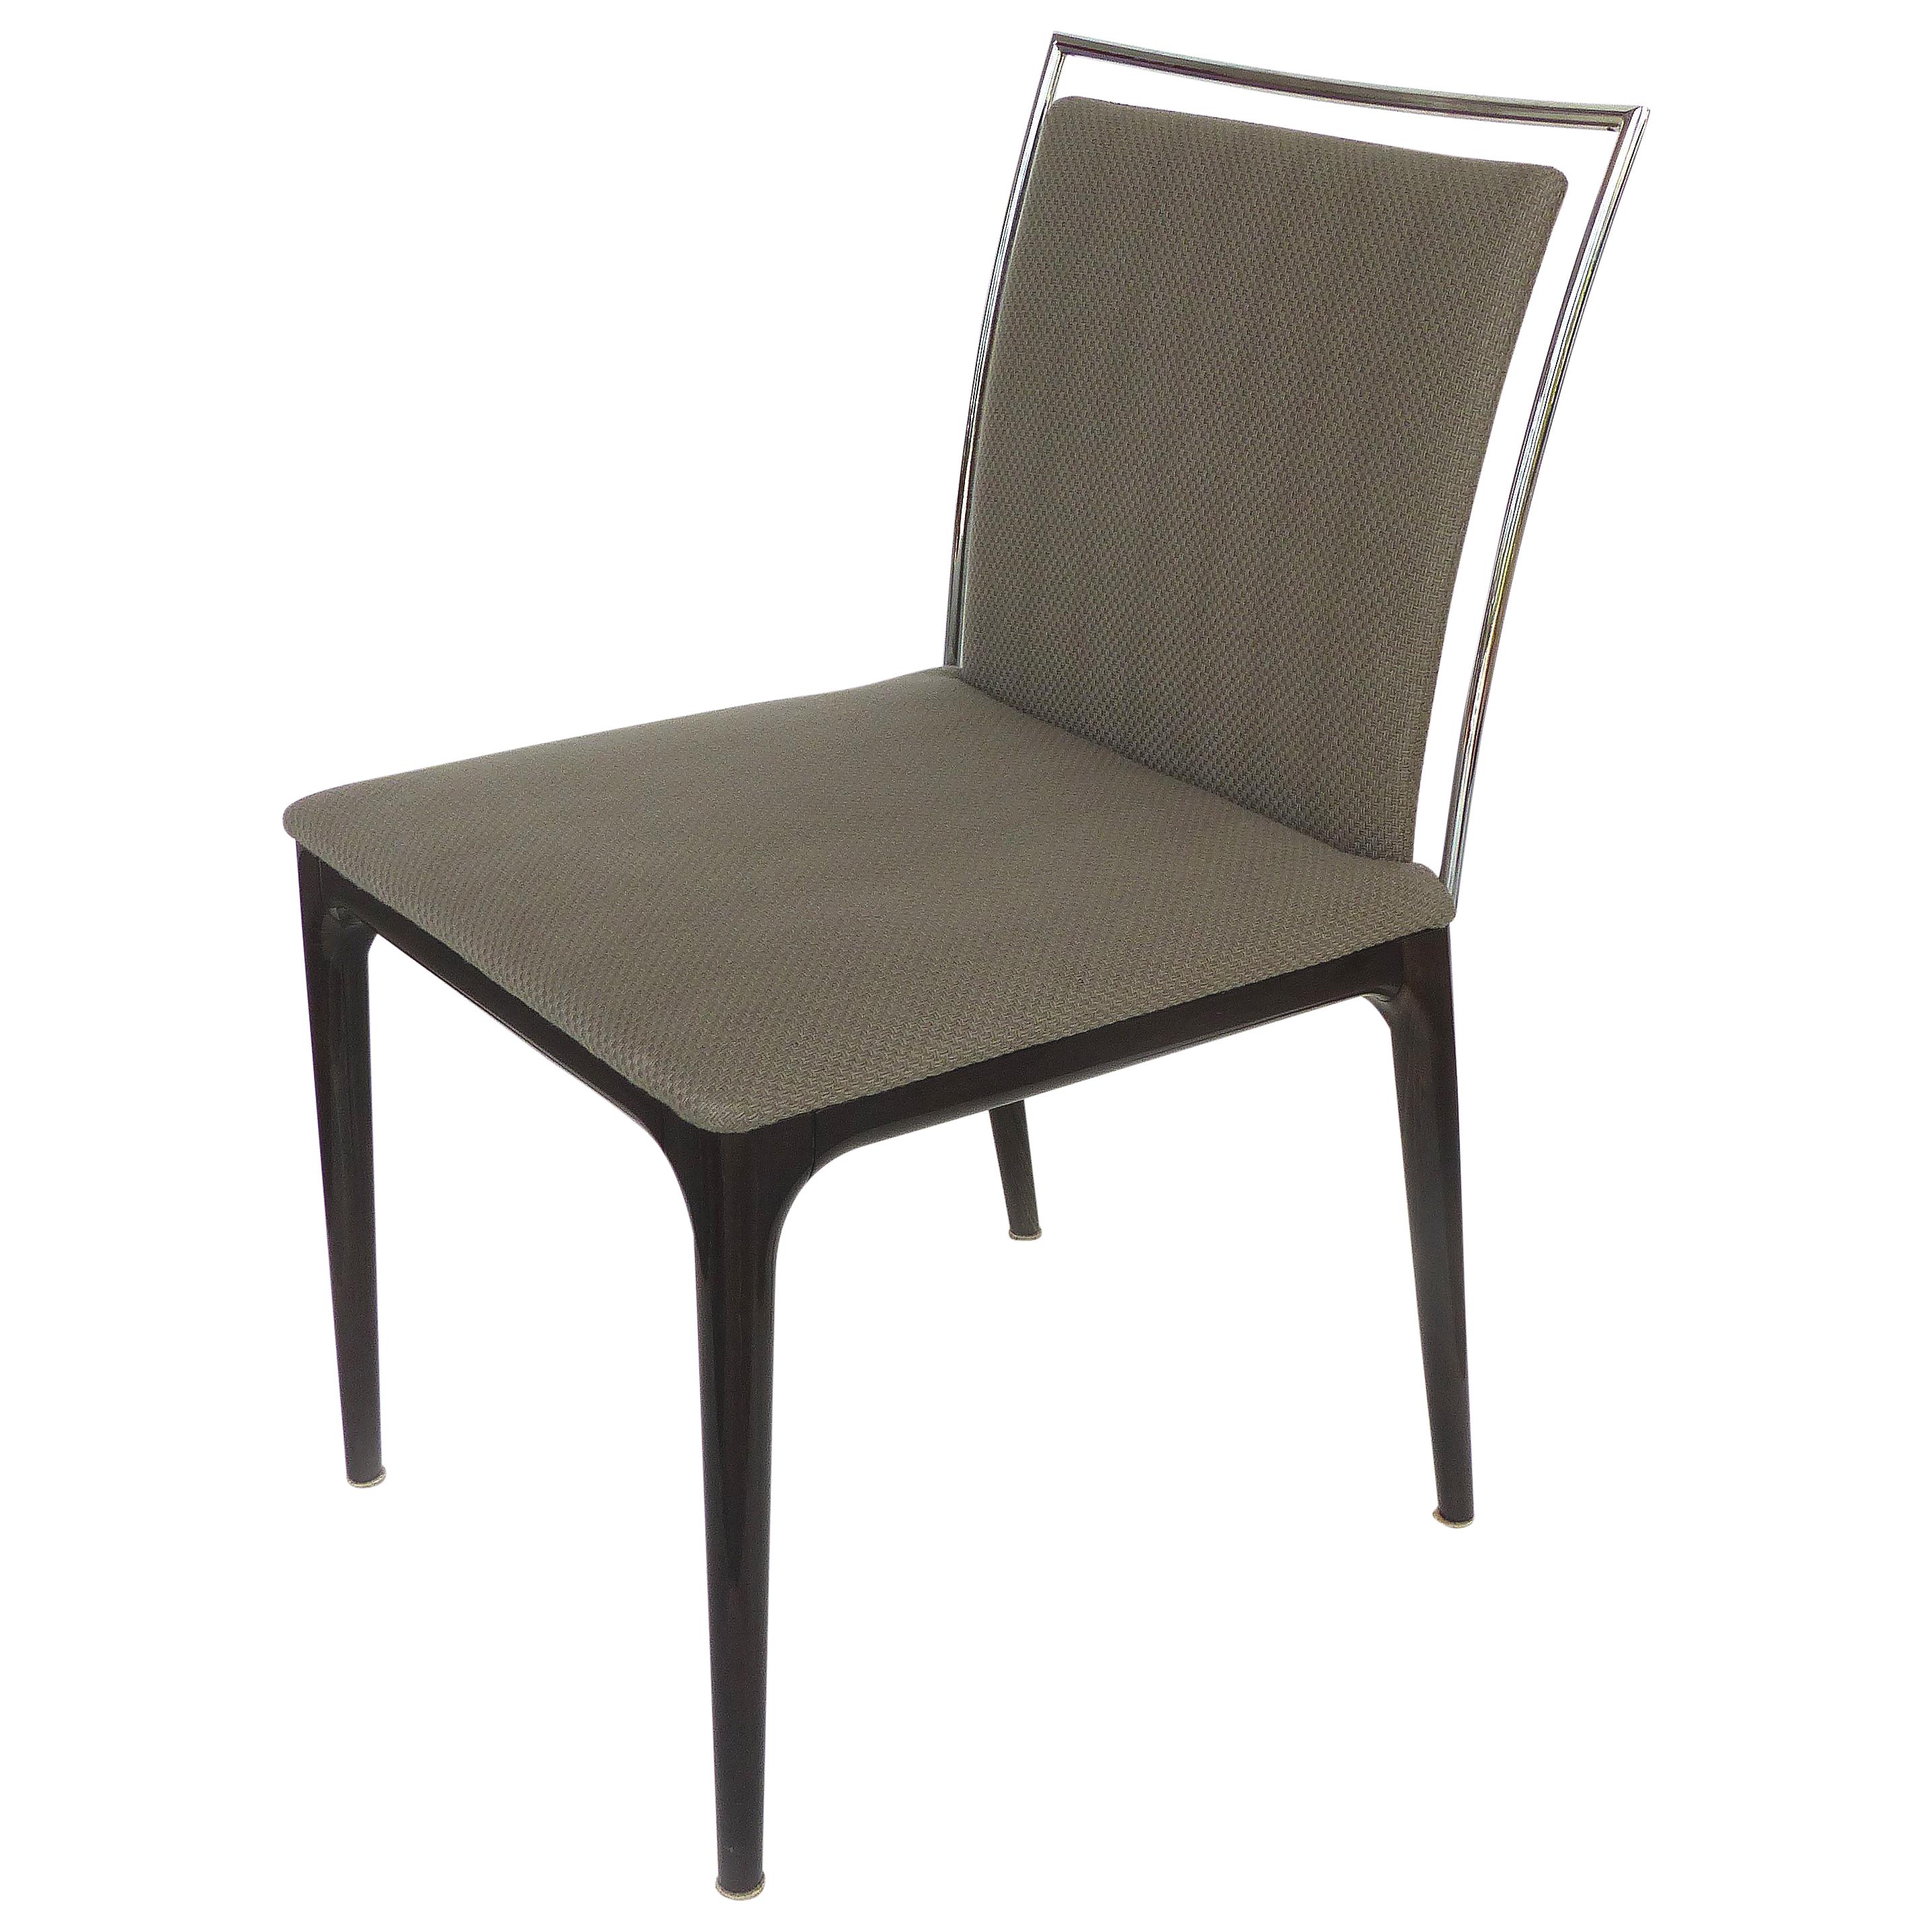  G. Soressi for Pietro Constantini of Italy "Four Seasons 3" Chair For Sale